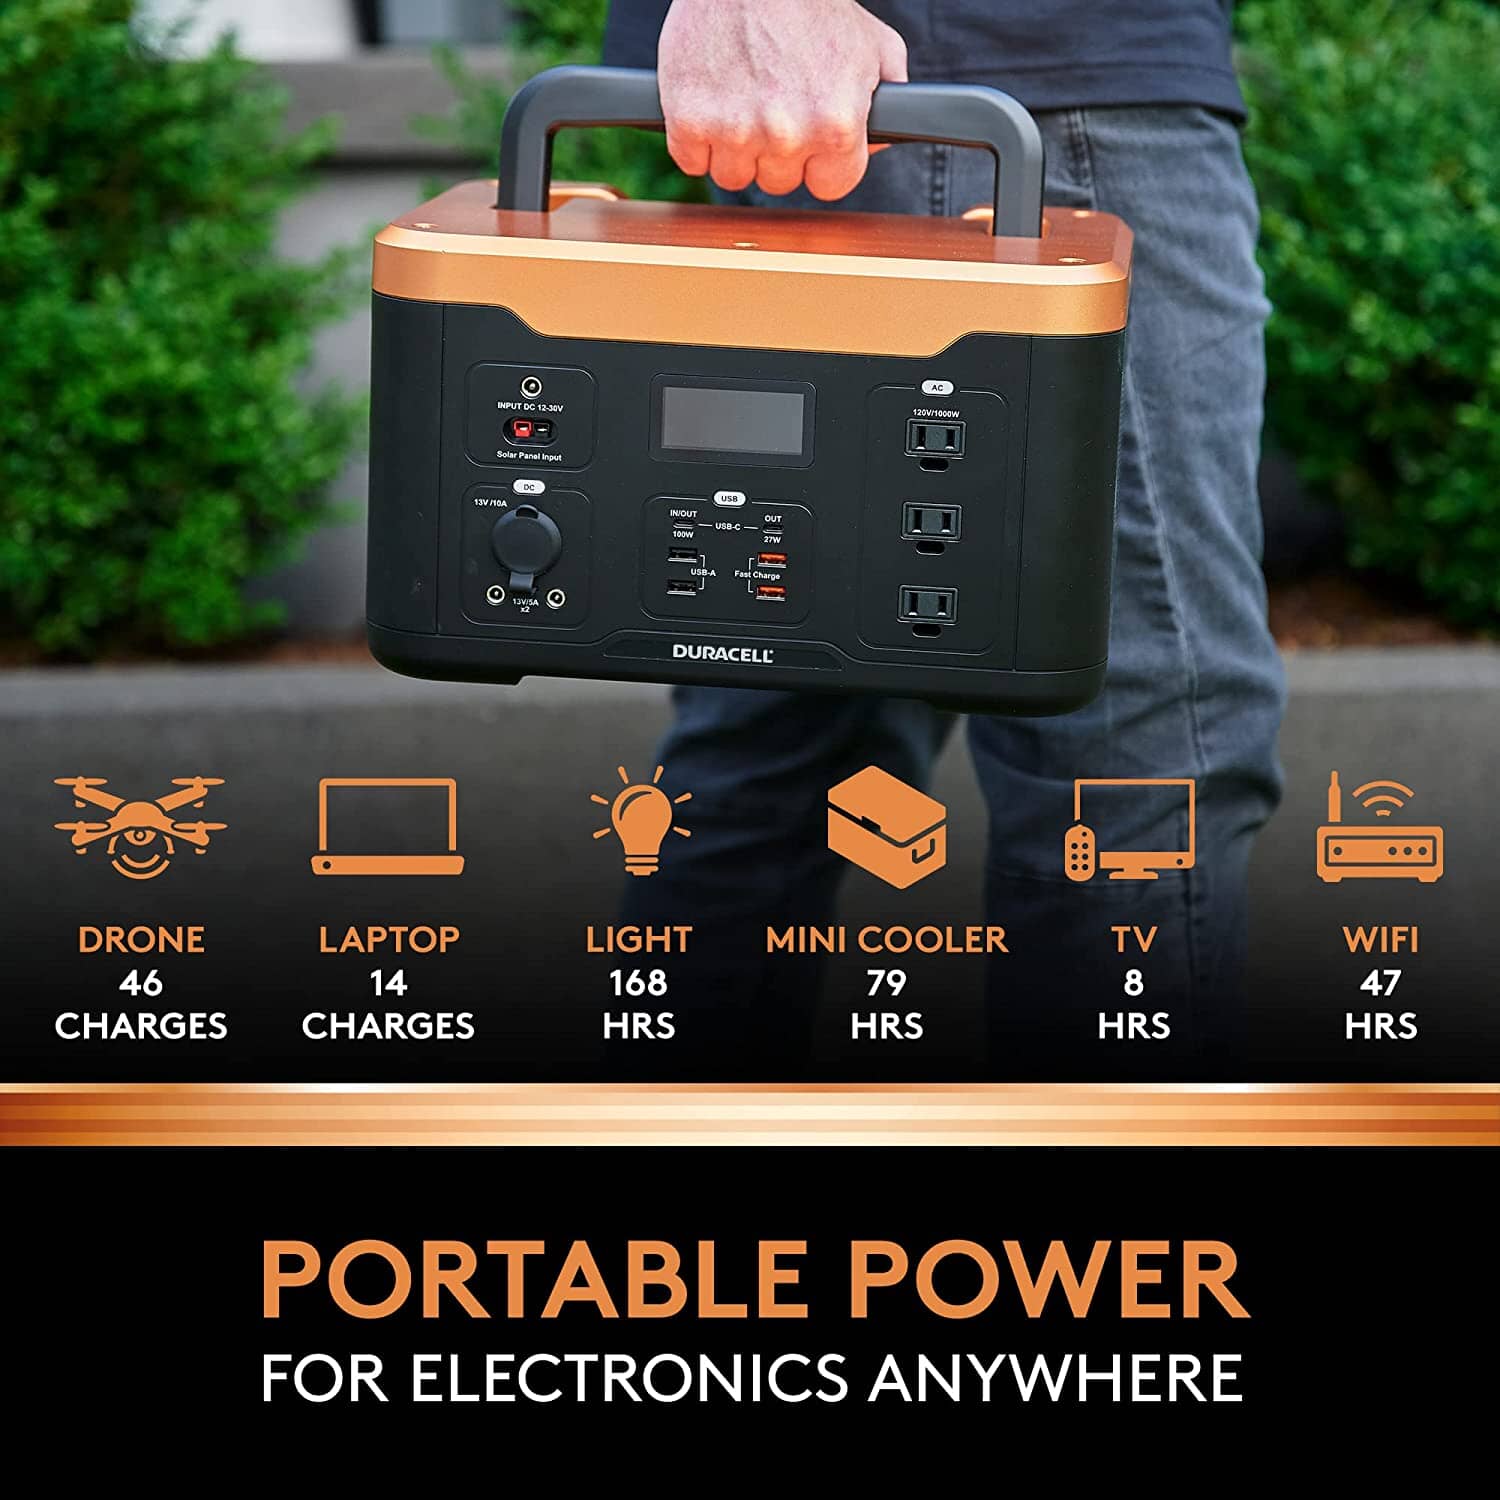  Image showing what the portable power station can charge and for how long.